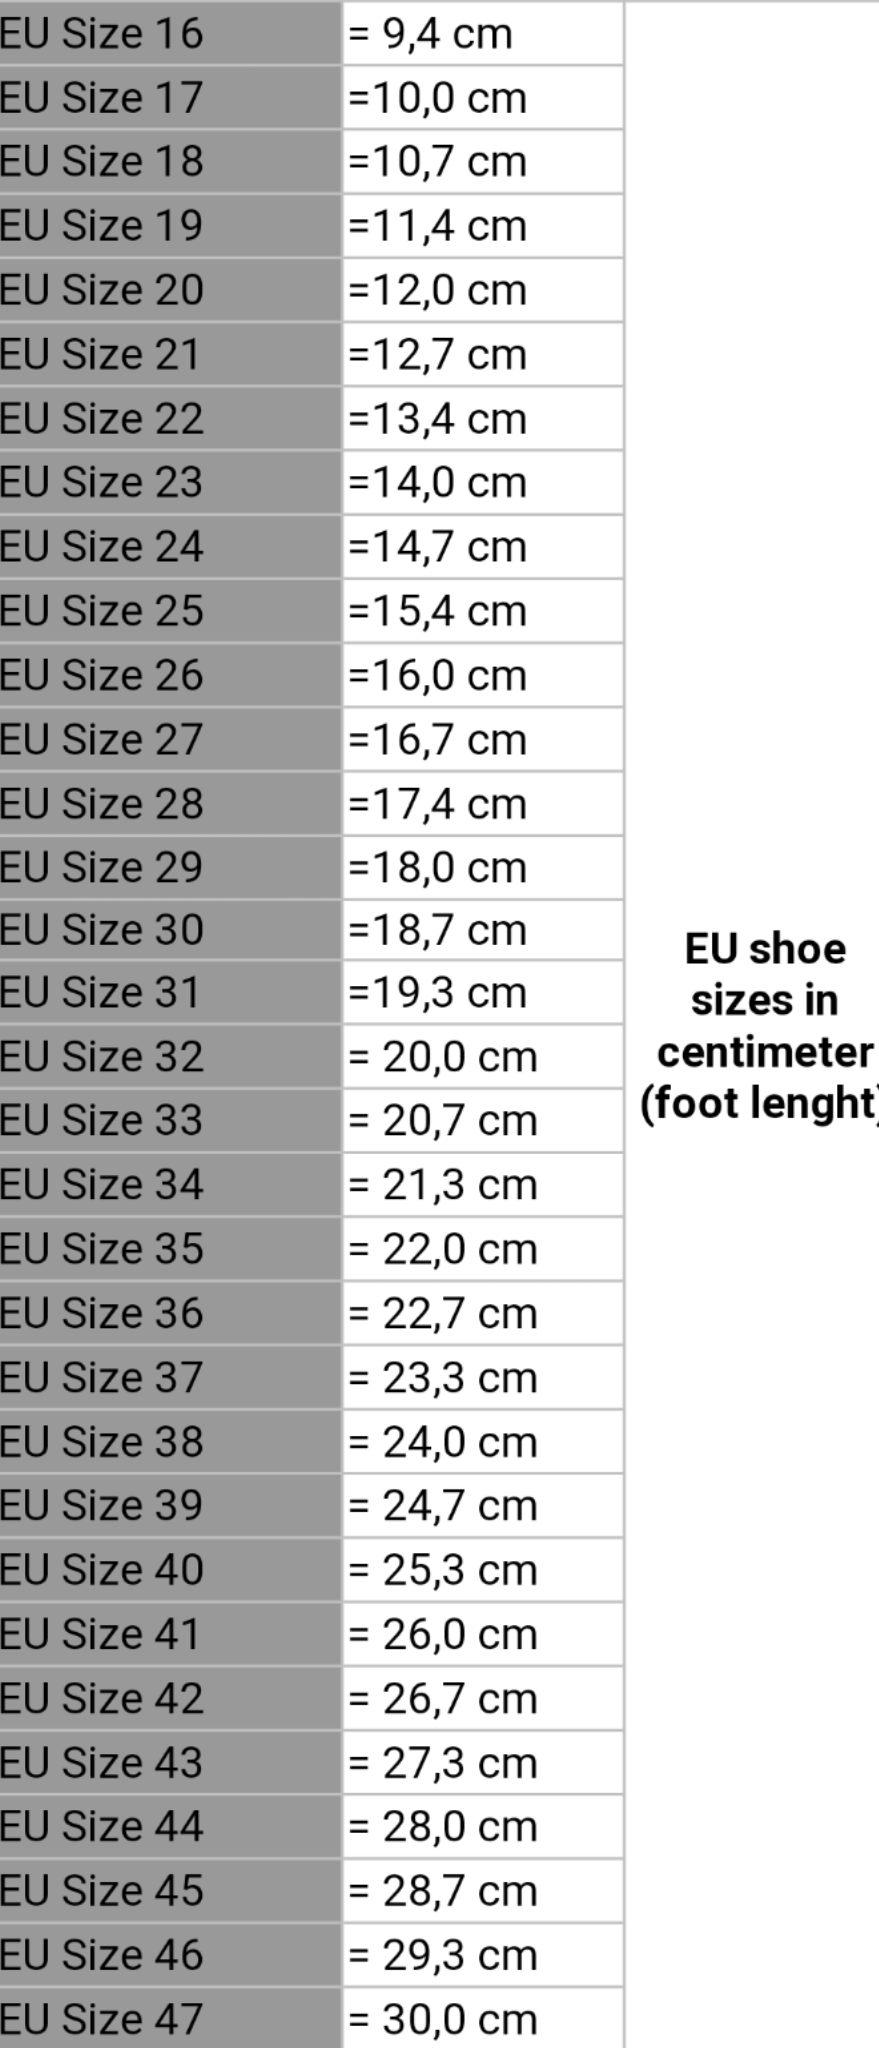 Measurements and Size Chart (NOT FOR SALE)